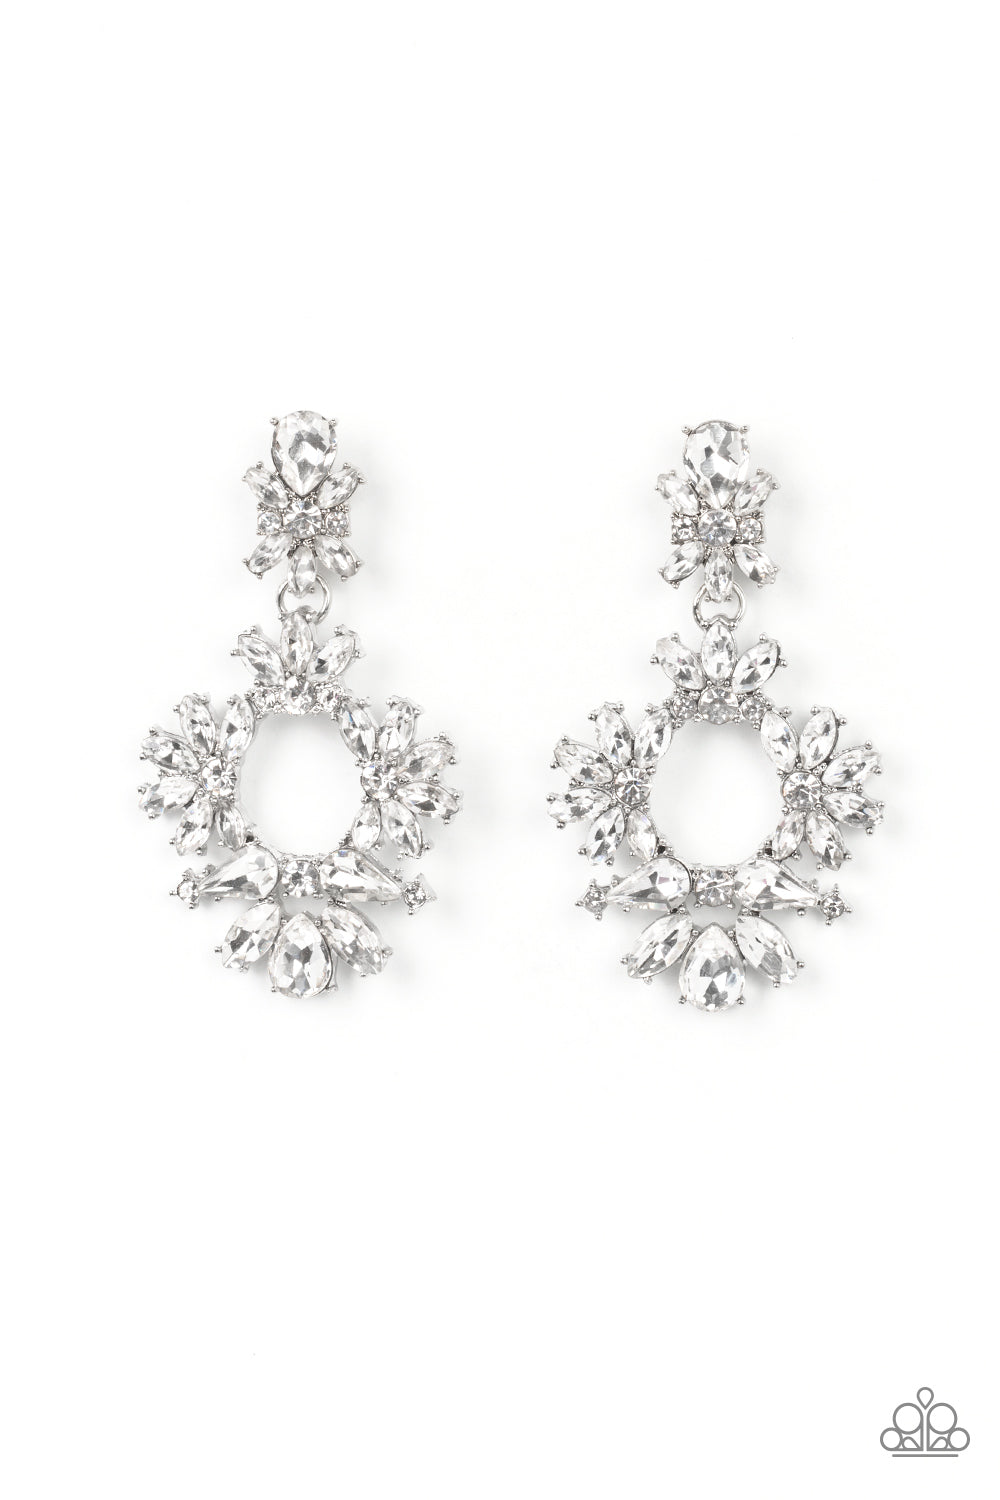 Leave them Speechless - White and Silver Dazzling Earrings - Paparazzi Accessories -  Ablaze with a mismatched assortment of brilliant white rhinestones, a stunning wreath swings from the bottom of a dainty white rhinestone fitting for a jaw-dropping dazzle earrings.